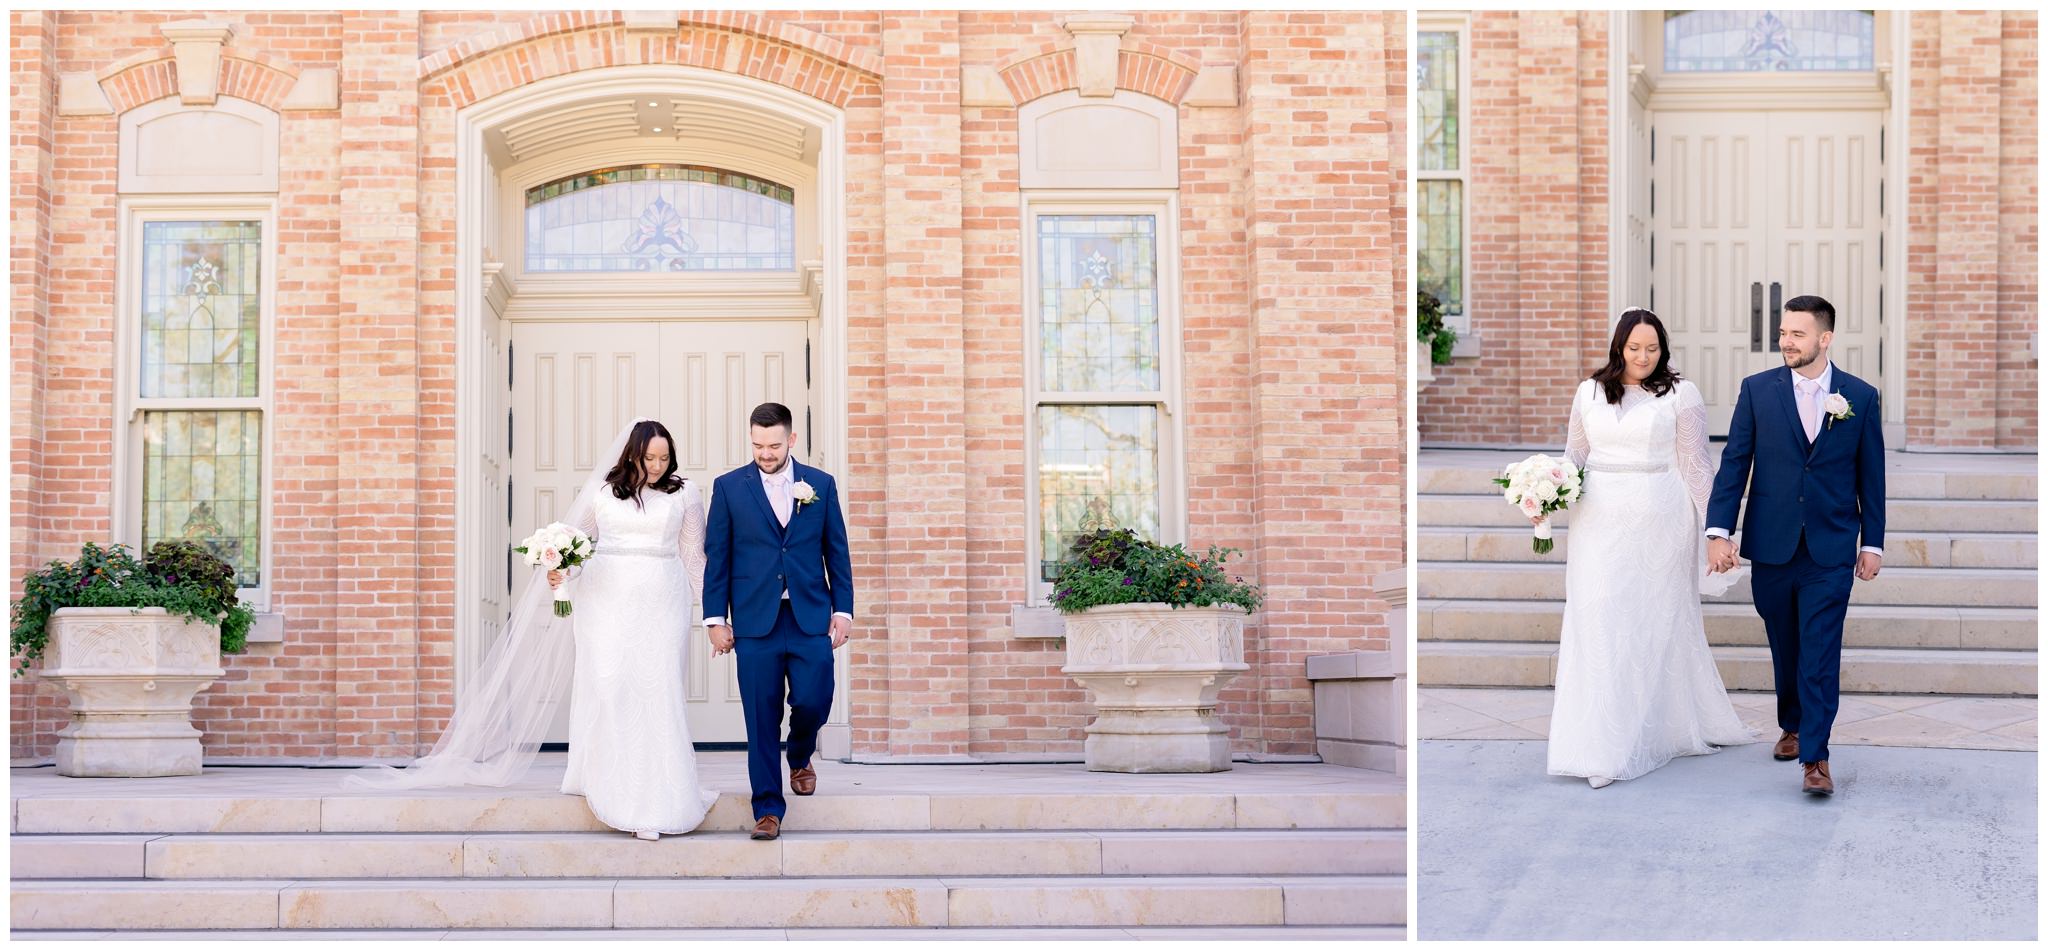 Bride and groom walking at the Provo City Center Temple